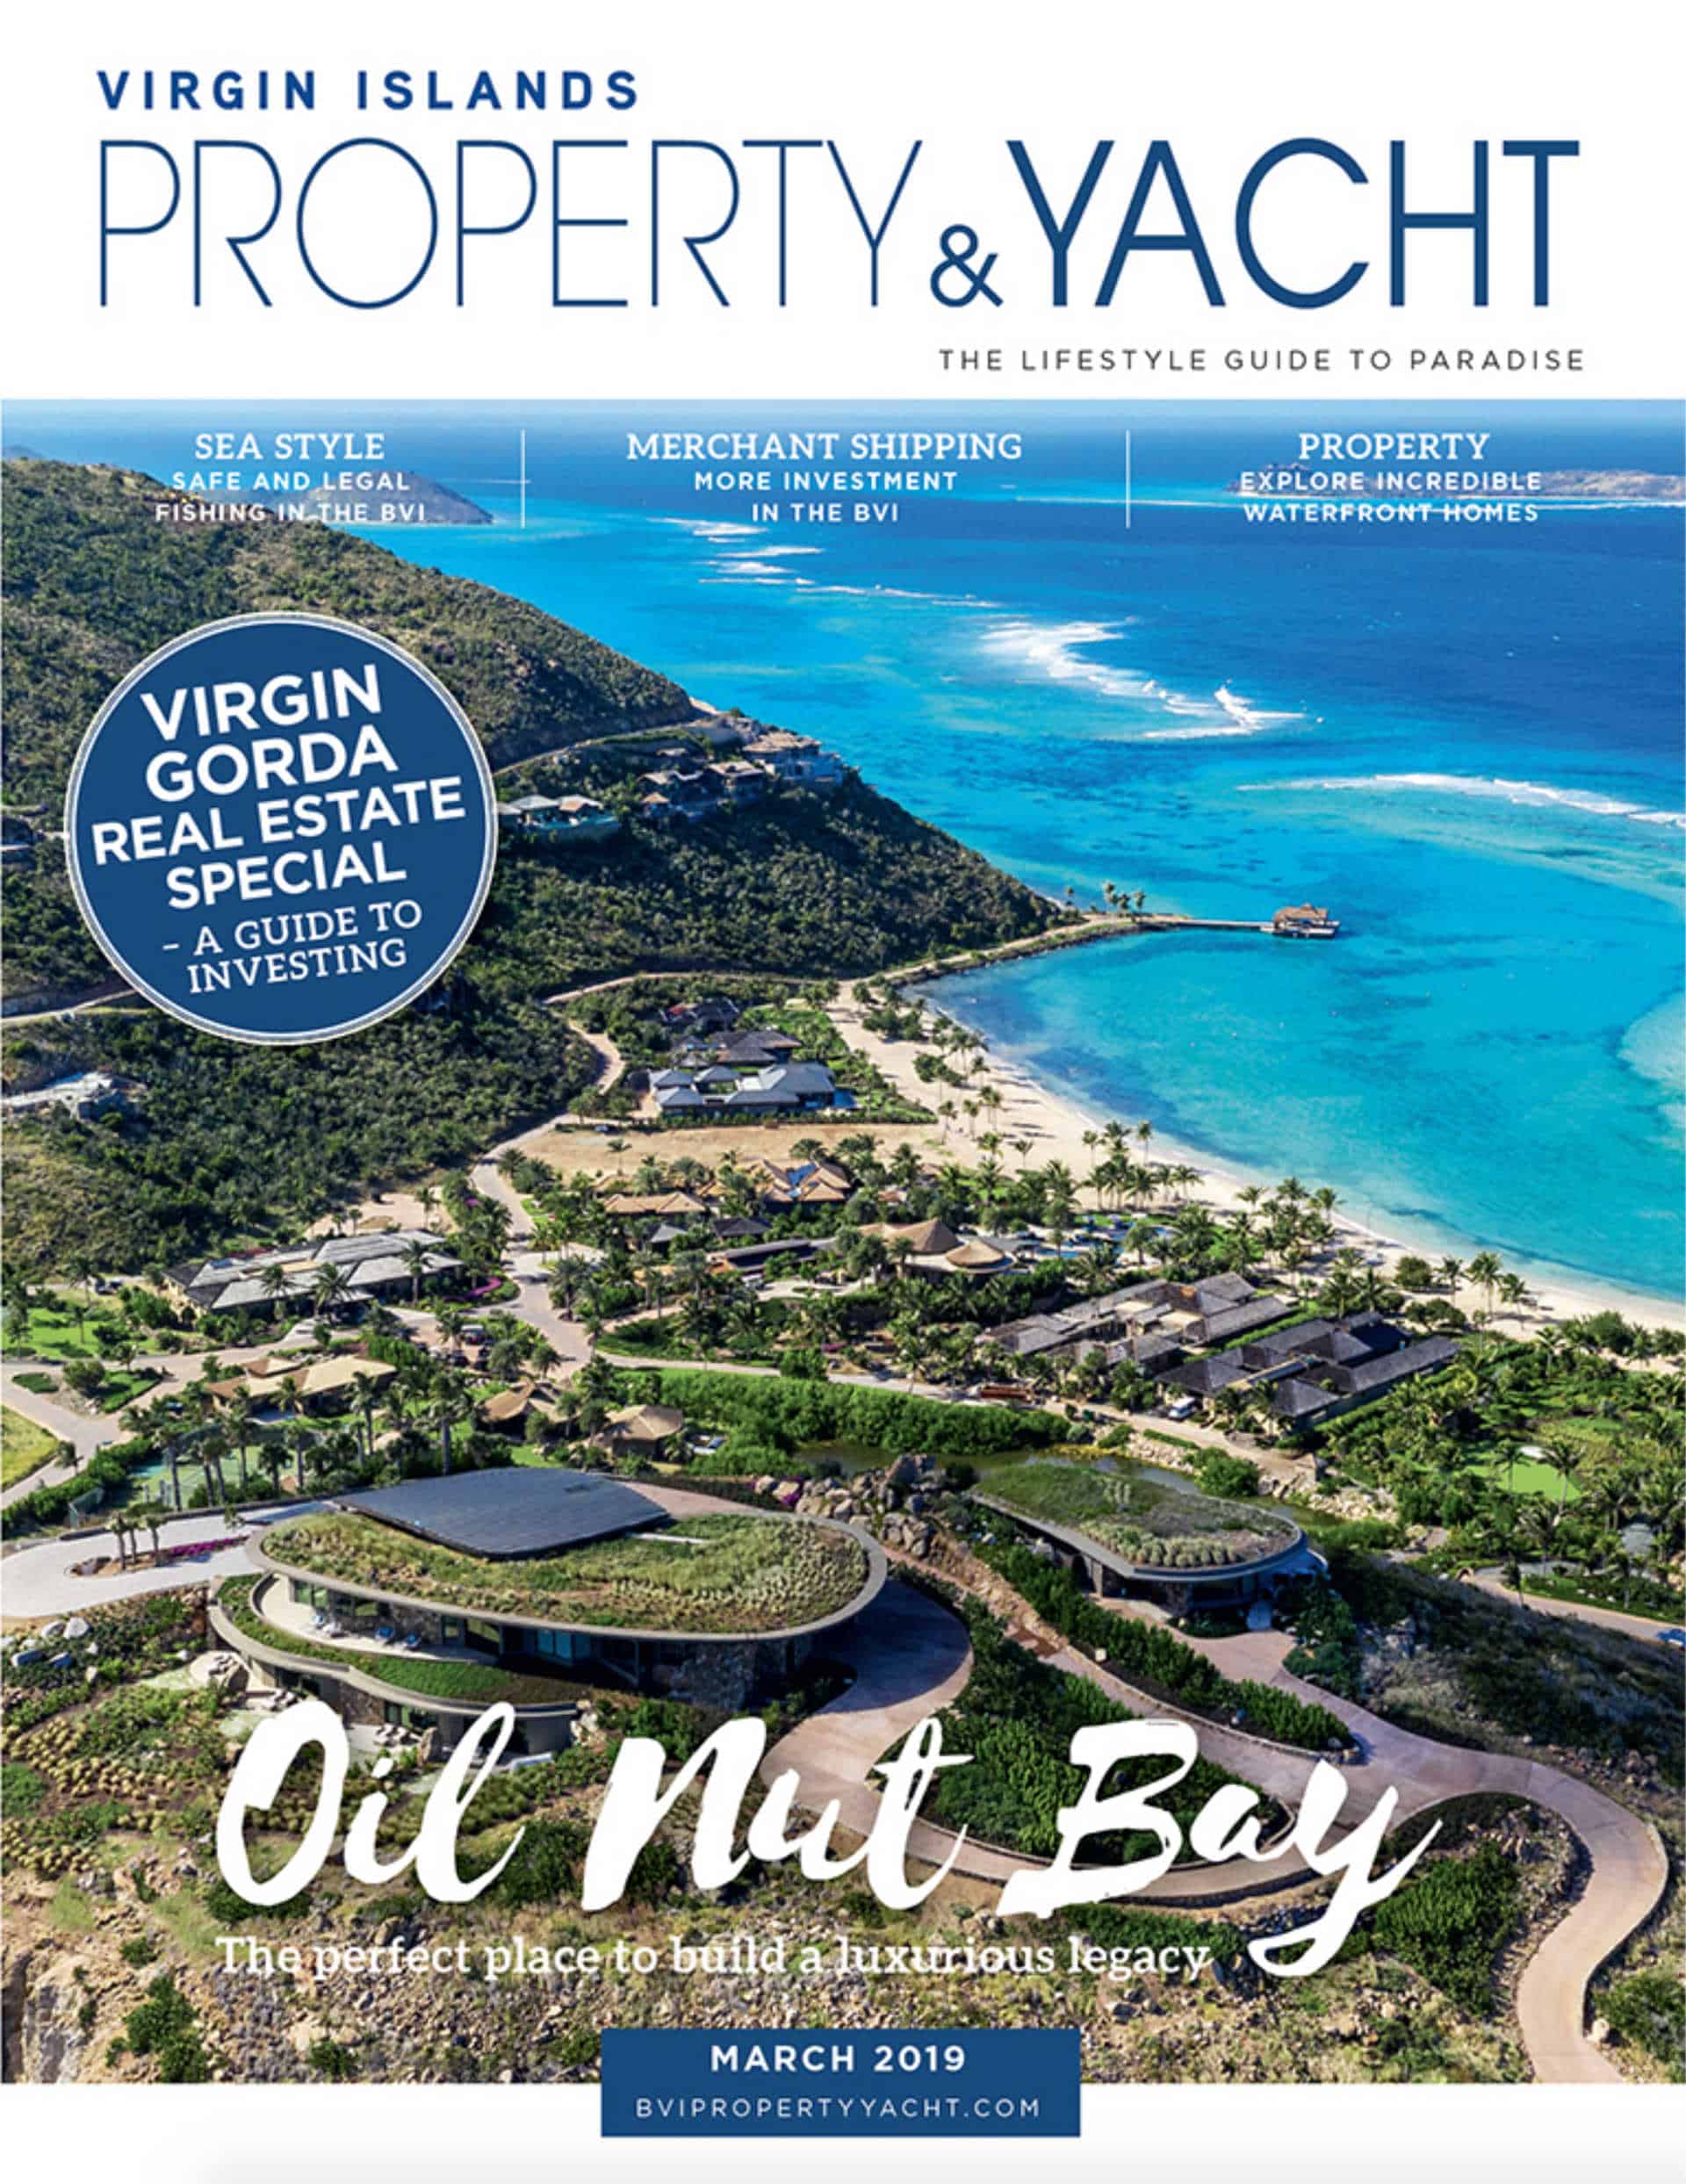 Property and Yacht Magazine Feature